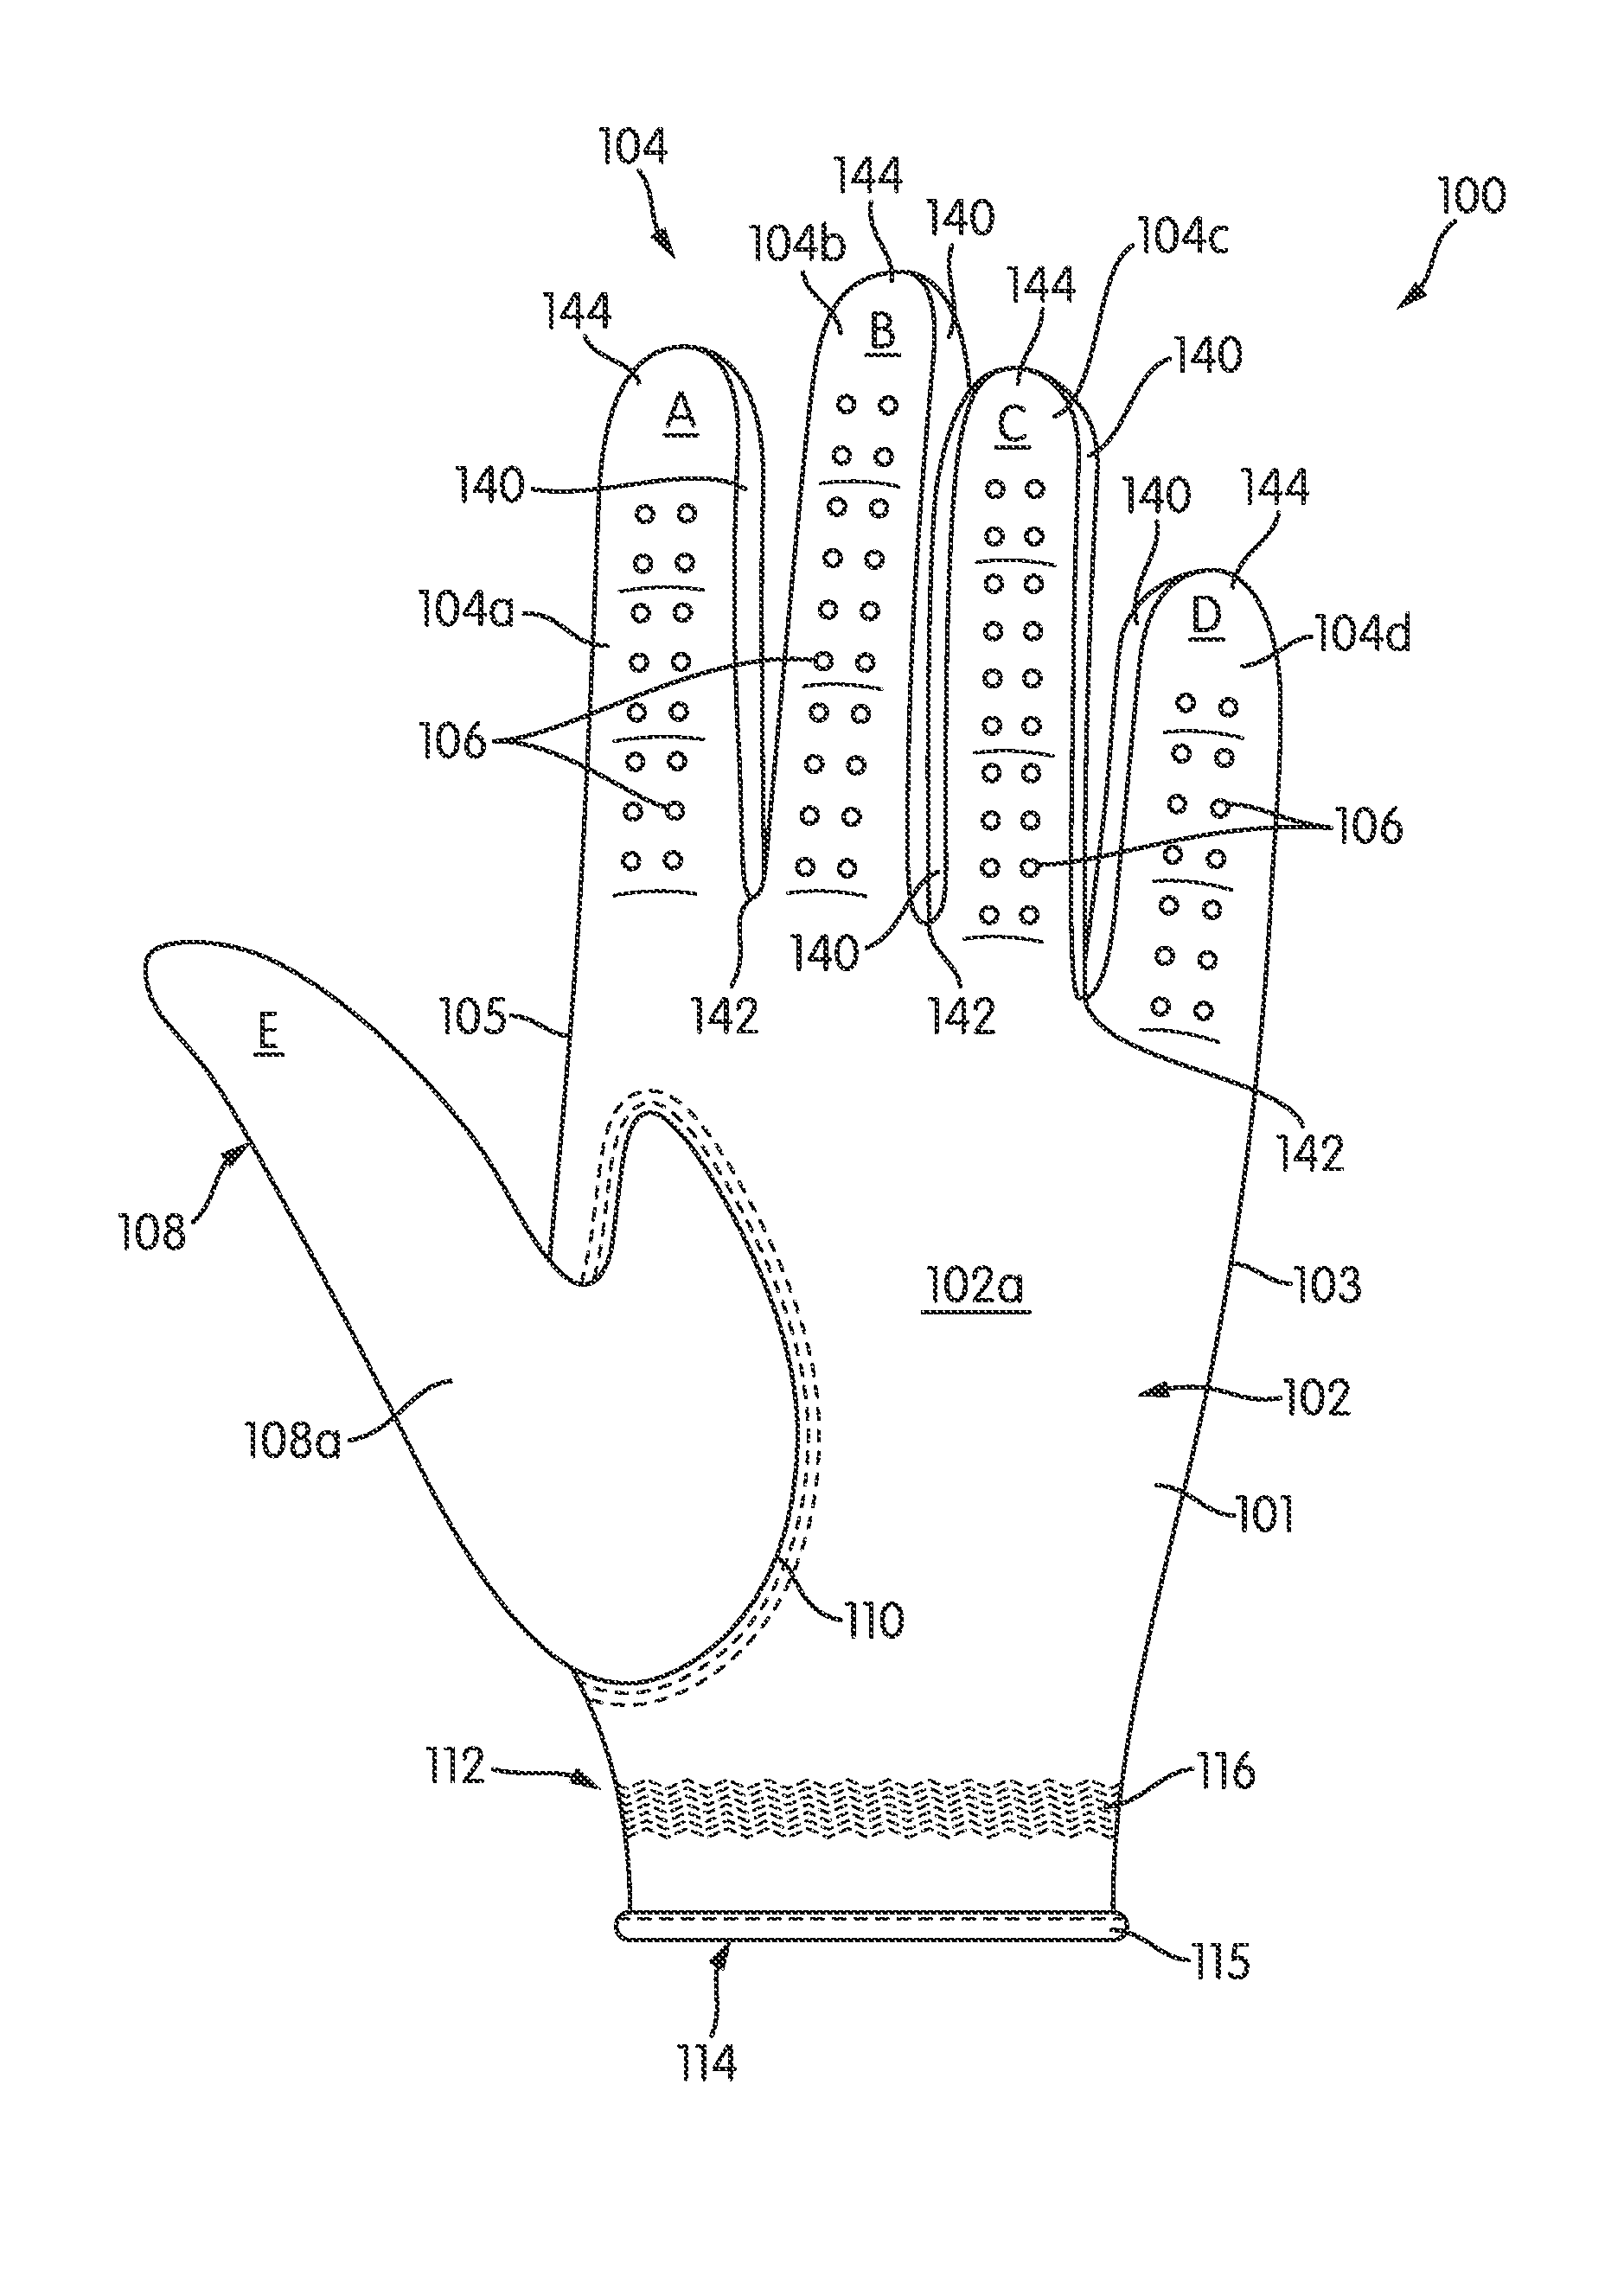 Flexible supported glove structures